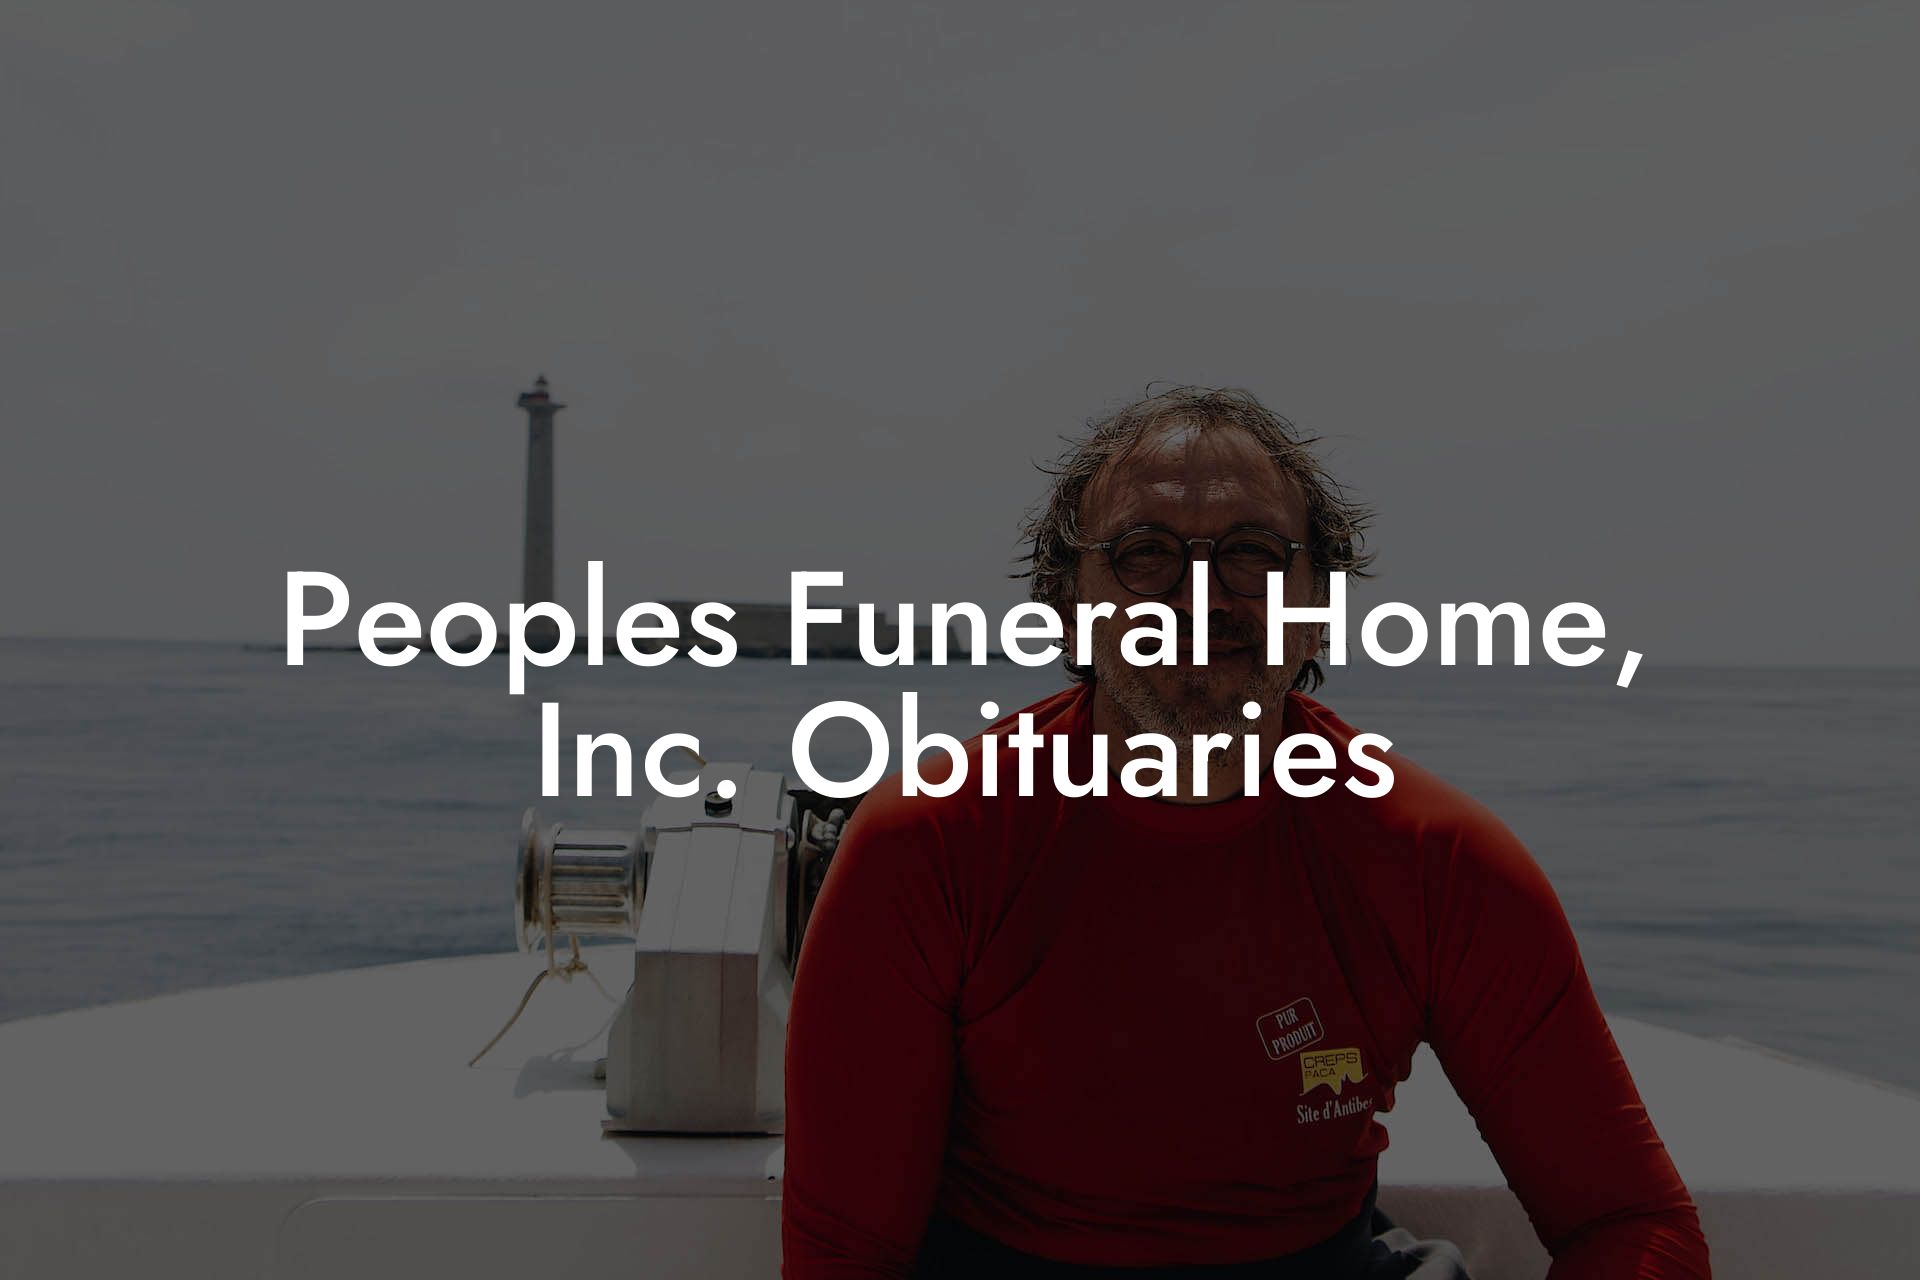 Peoples Funeral Home, Inc. Obituaries